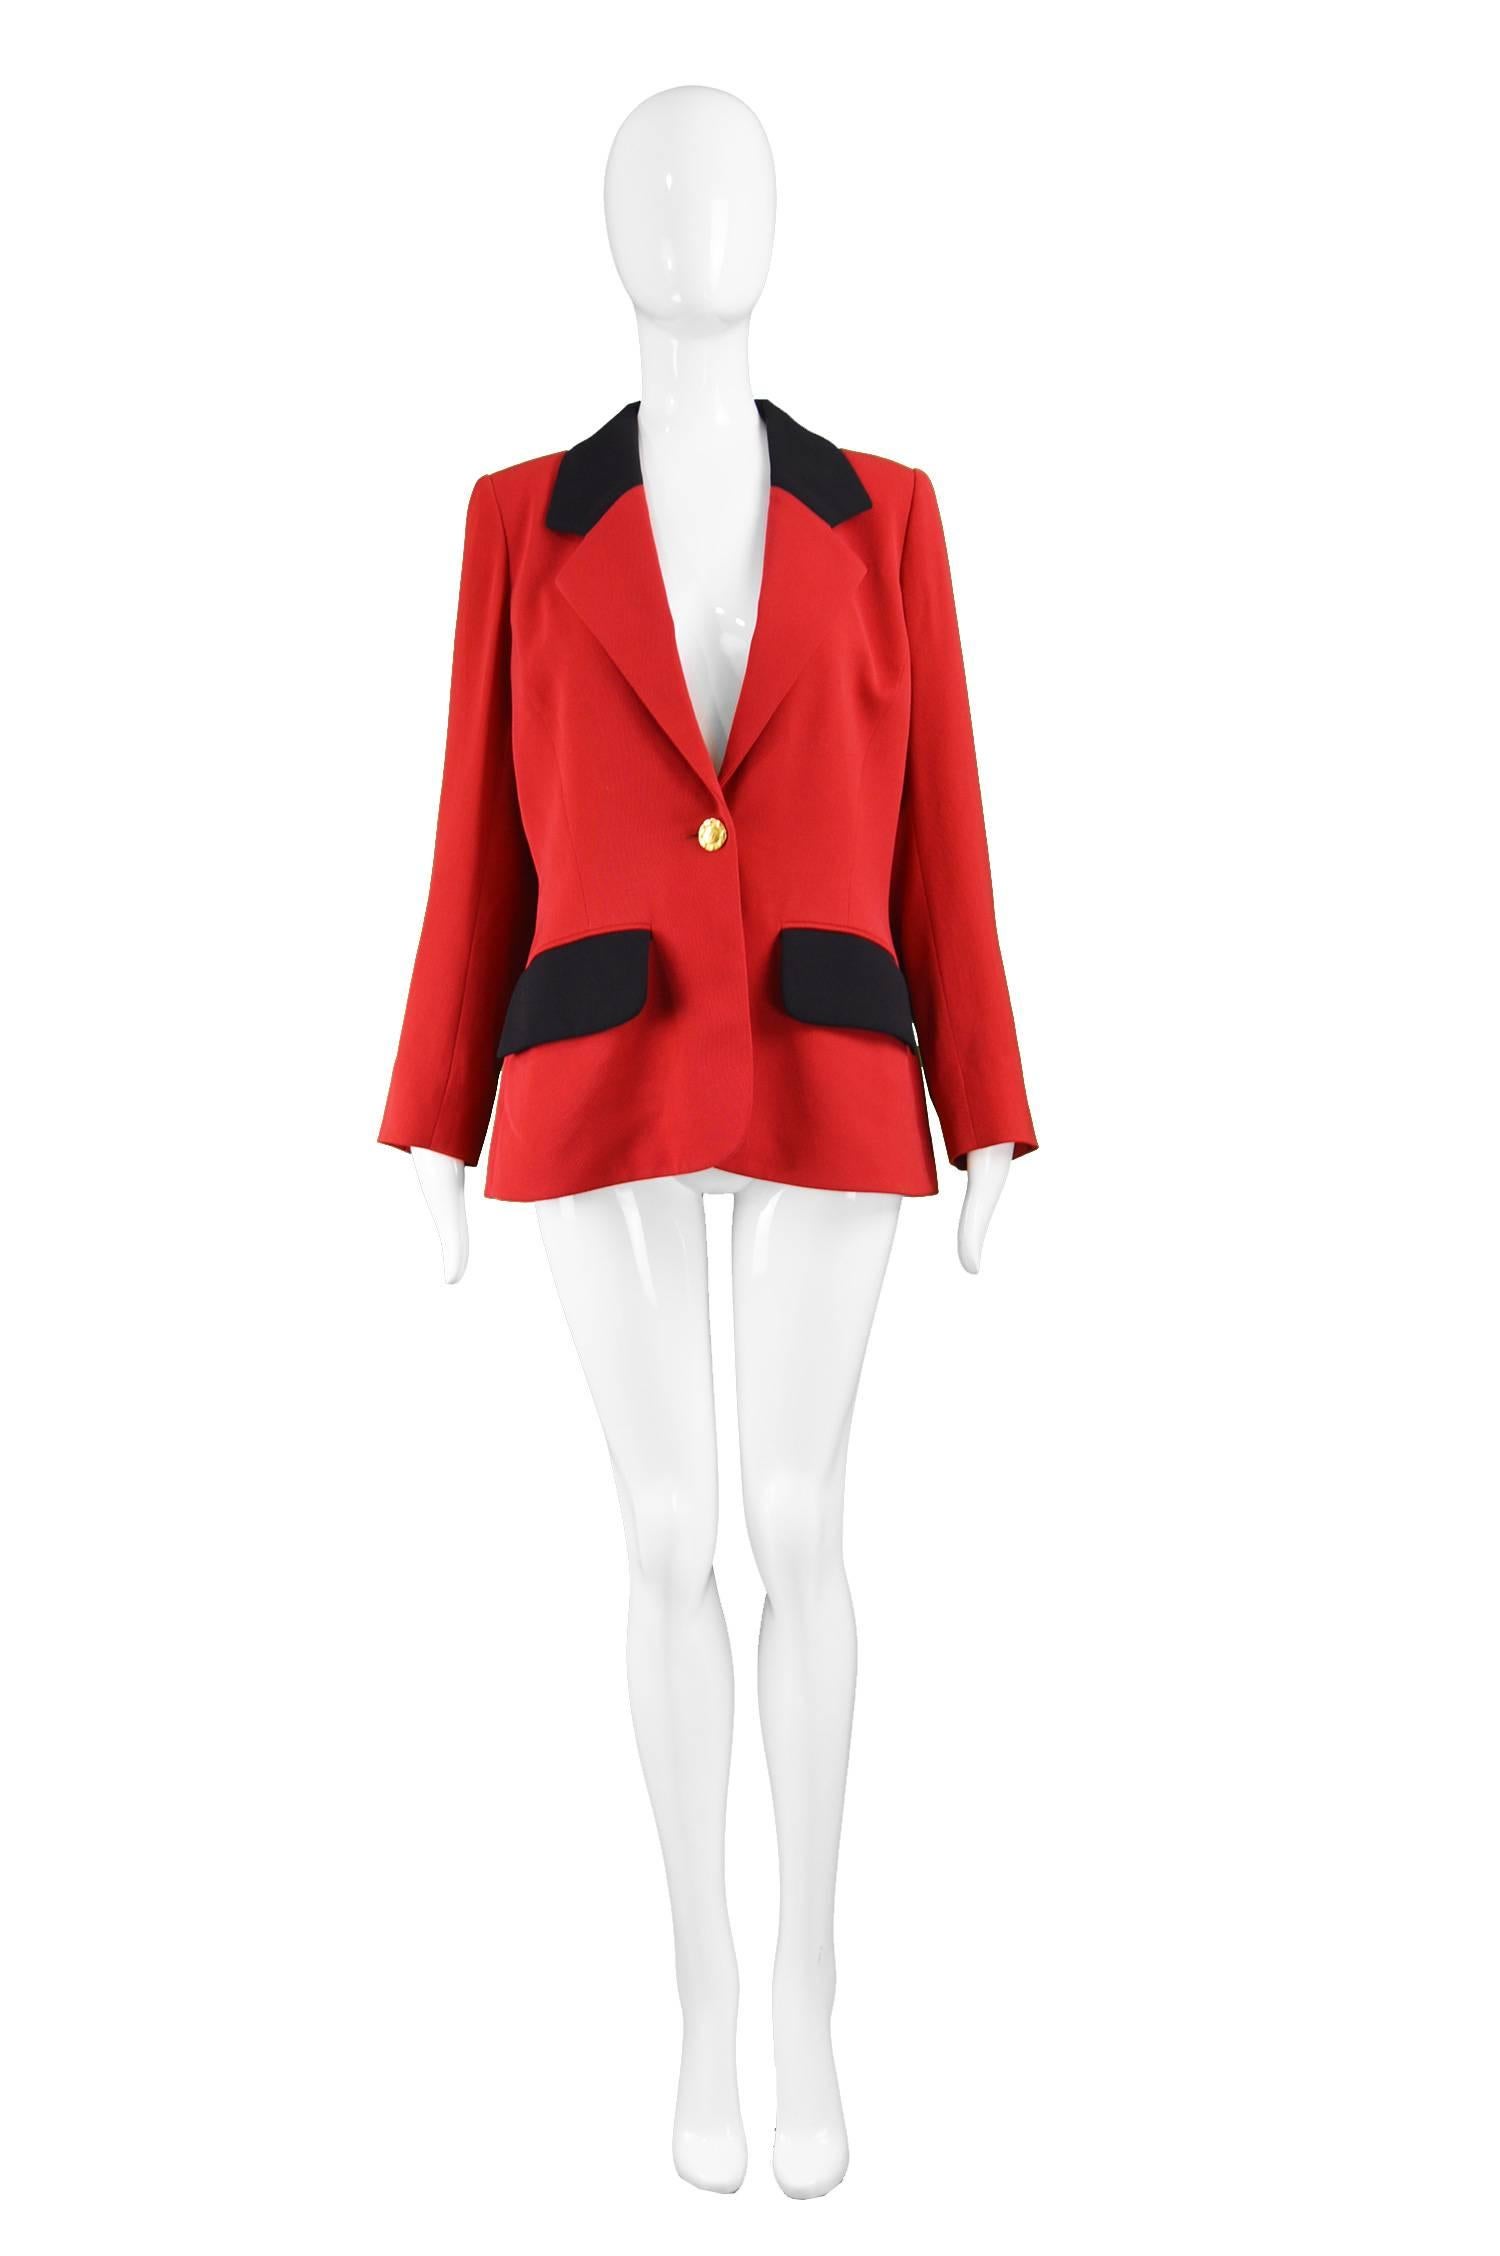 Celine Vintage Red & Black Pure Wool Blazer Jacket, 1980s 

Size: Marked 42 which is roughly a UK 14/ US 10 but would also suit a UK 16/ US 12 due to the roomier bust. Please check measurements.  
Bust - 42” / 106cm (allow a couple of inches